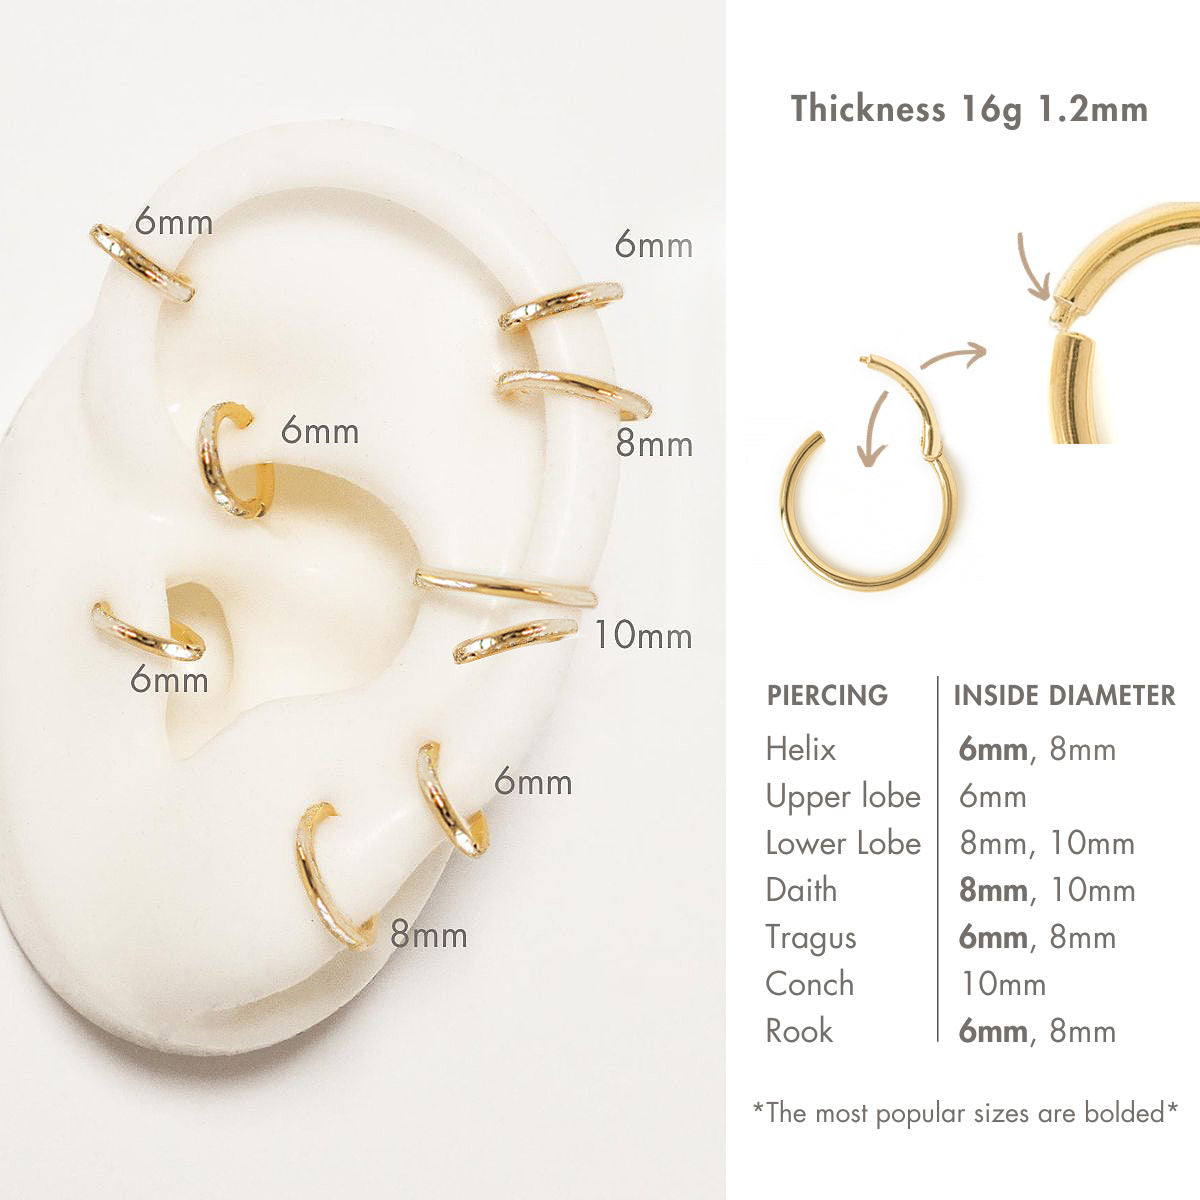 Amazon.com: 14K Solid Gold Basic Seamless Snug Fit Nose Ring - Minimalist  20 Gauge Nose Hoop - 7mm 8mm - Cartilage Helix Piercing Jewelry - Septum  Hoop : Handmade Products